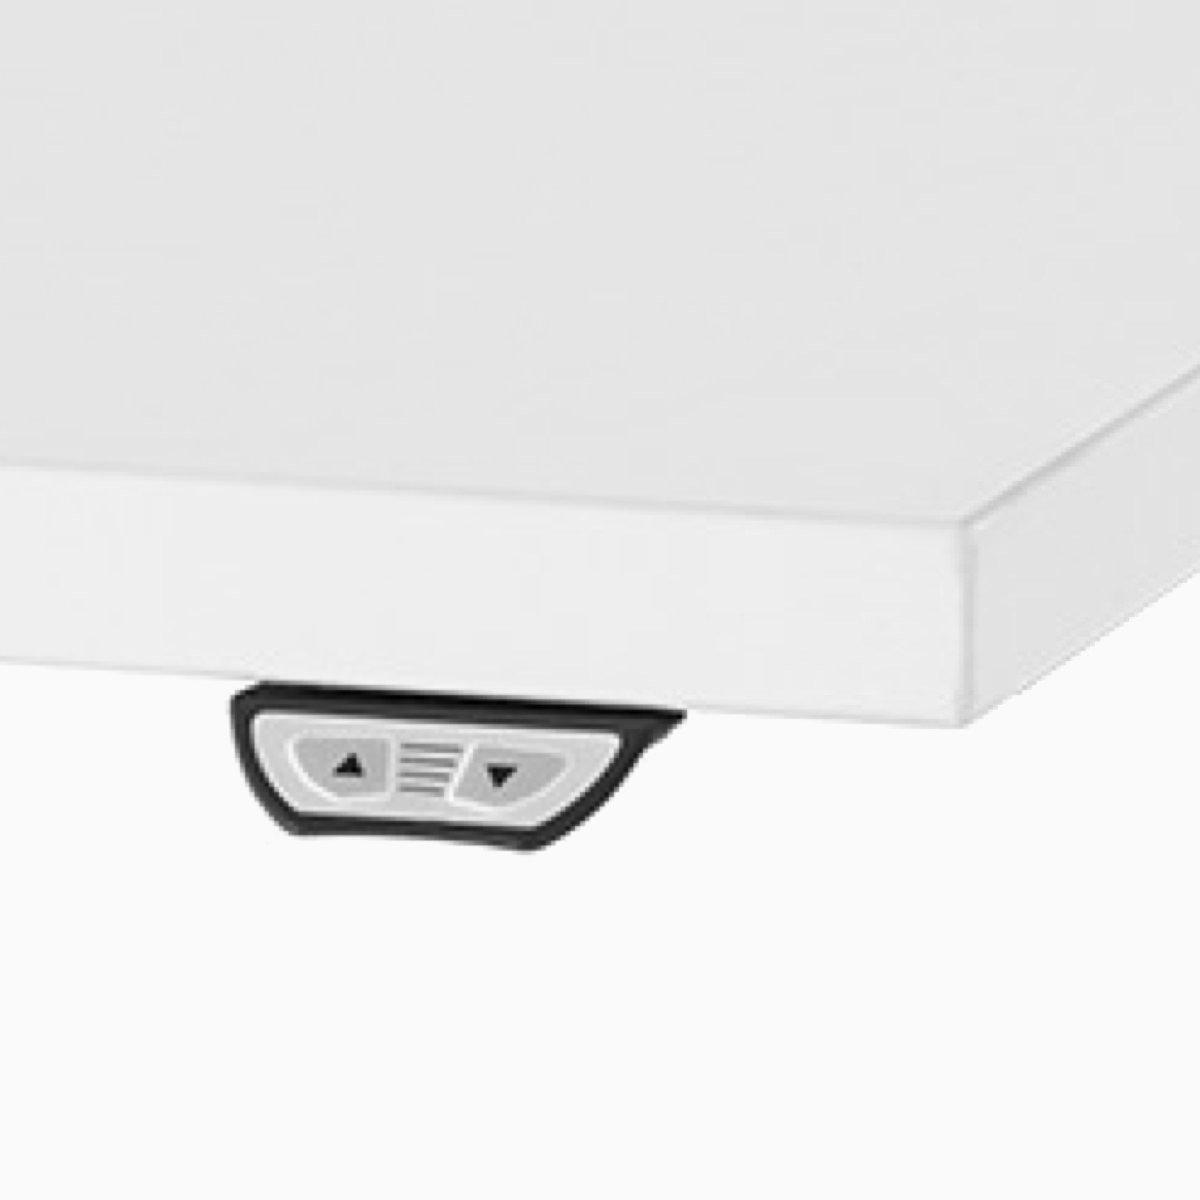 A close-up view of Nevi Sit-to-Stand's simple touch switch that adjusts height.